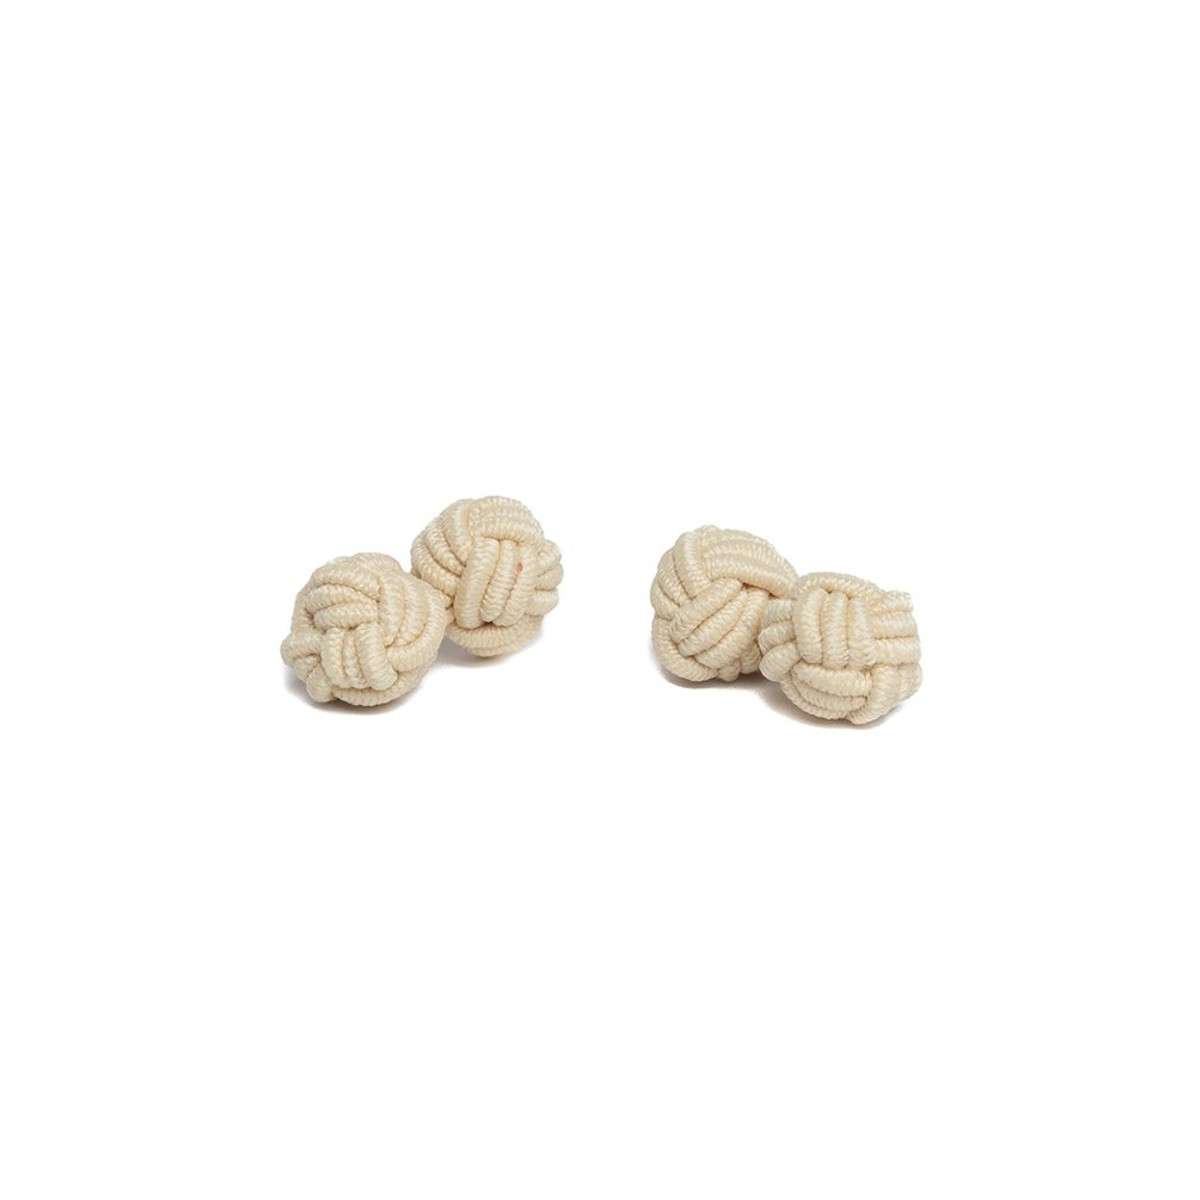 Pair of Solid Color Silk Knot Cufflinks - Champagne